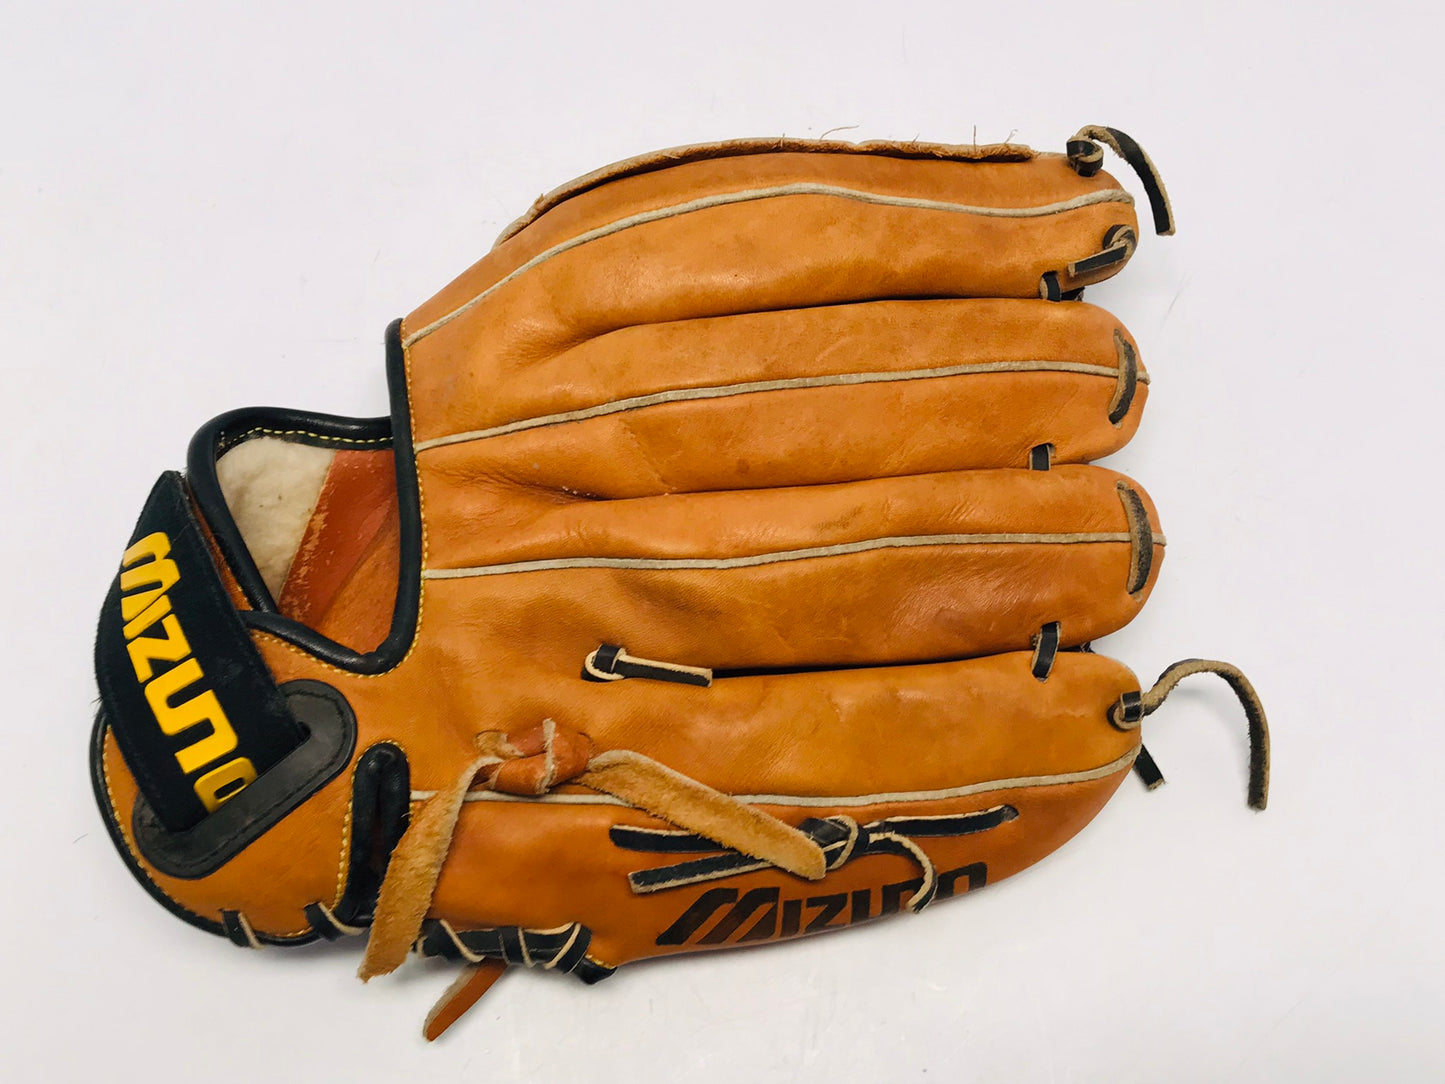 Baseball Glove Adult Size 12 inch Mizuno Leather Well Made Fits RIGHT Hand